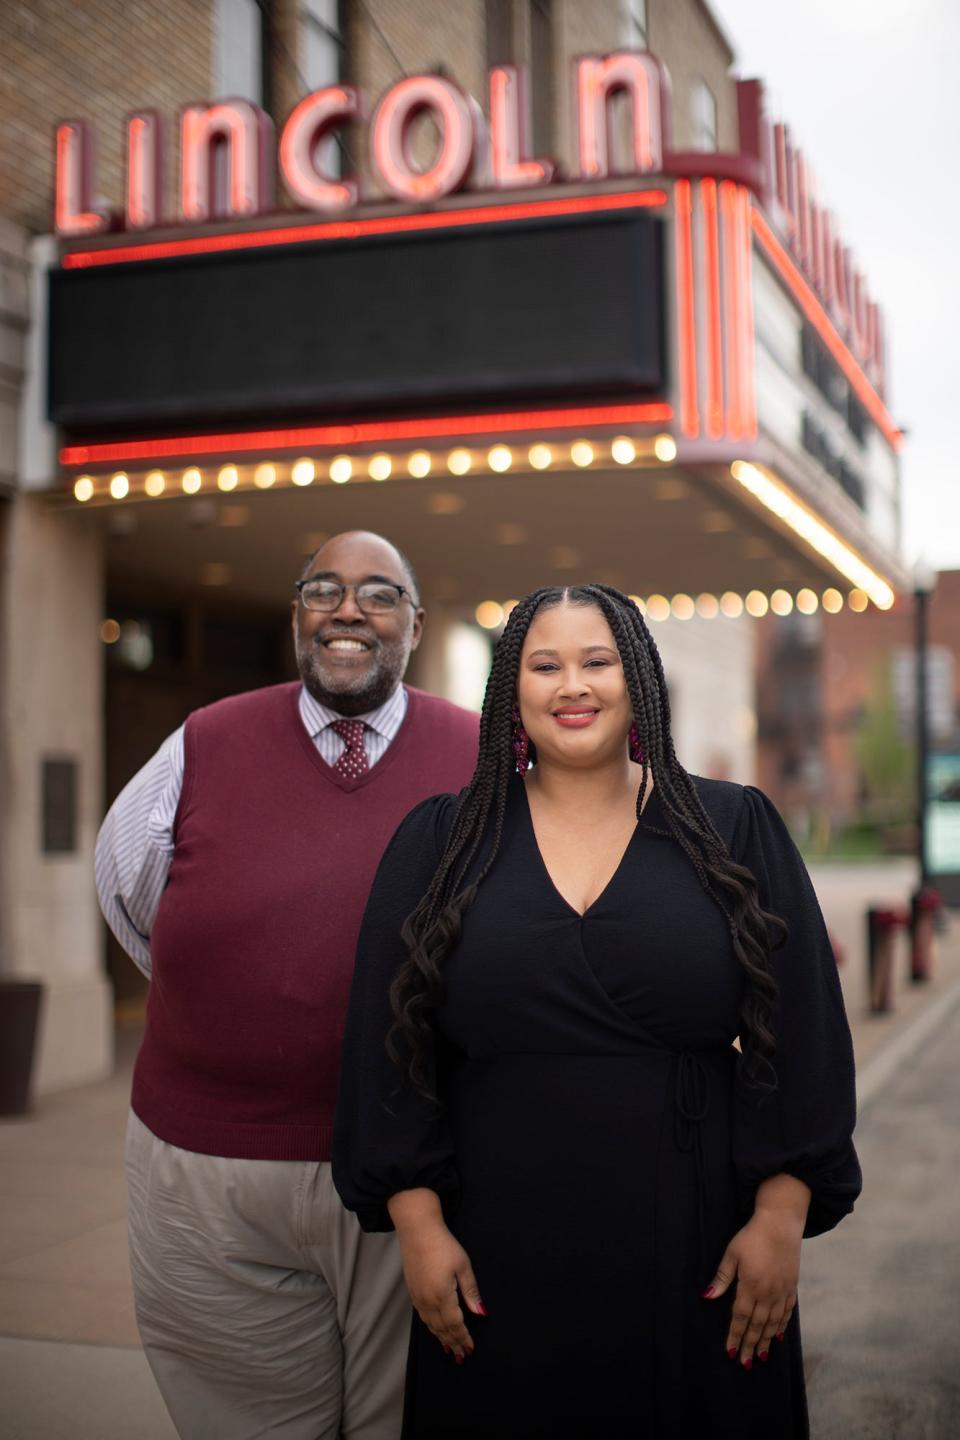 Milton Ruffin, choral director of the Milton Ruffin Gospel Chorale, and Destiny Coleman, Converging Arts Columbus board member, pose in front of the Lincoln Theatre.